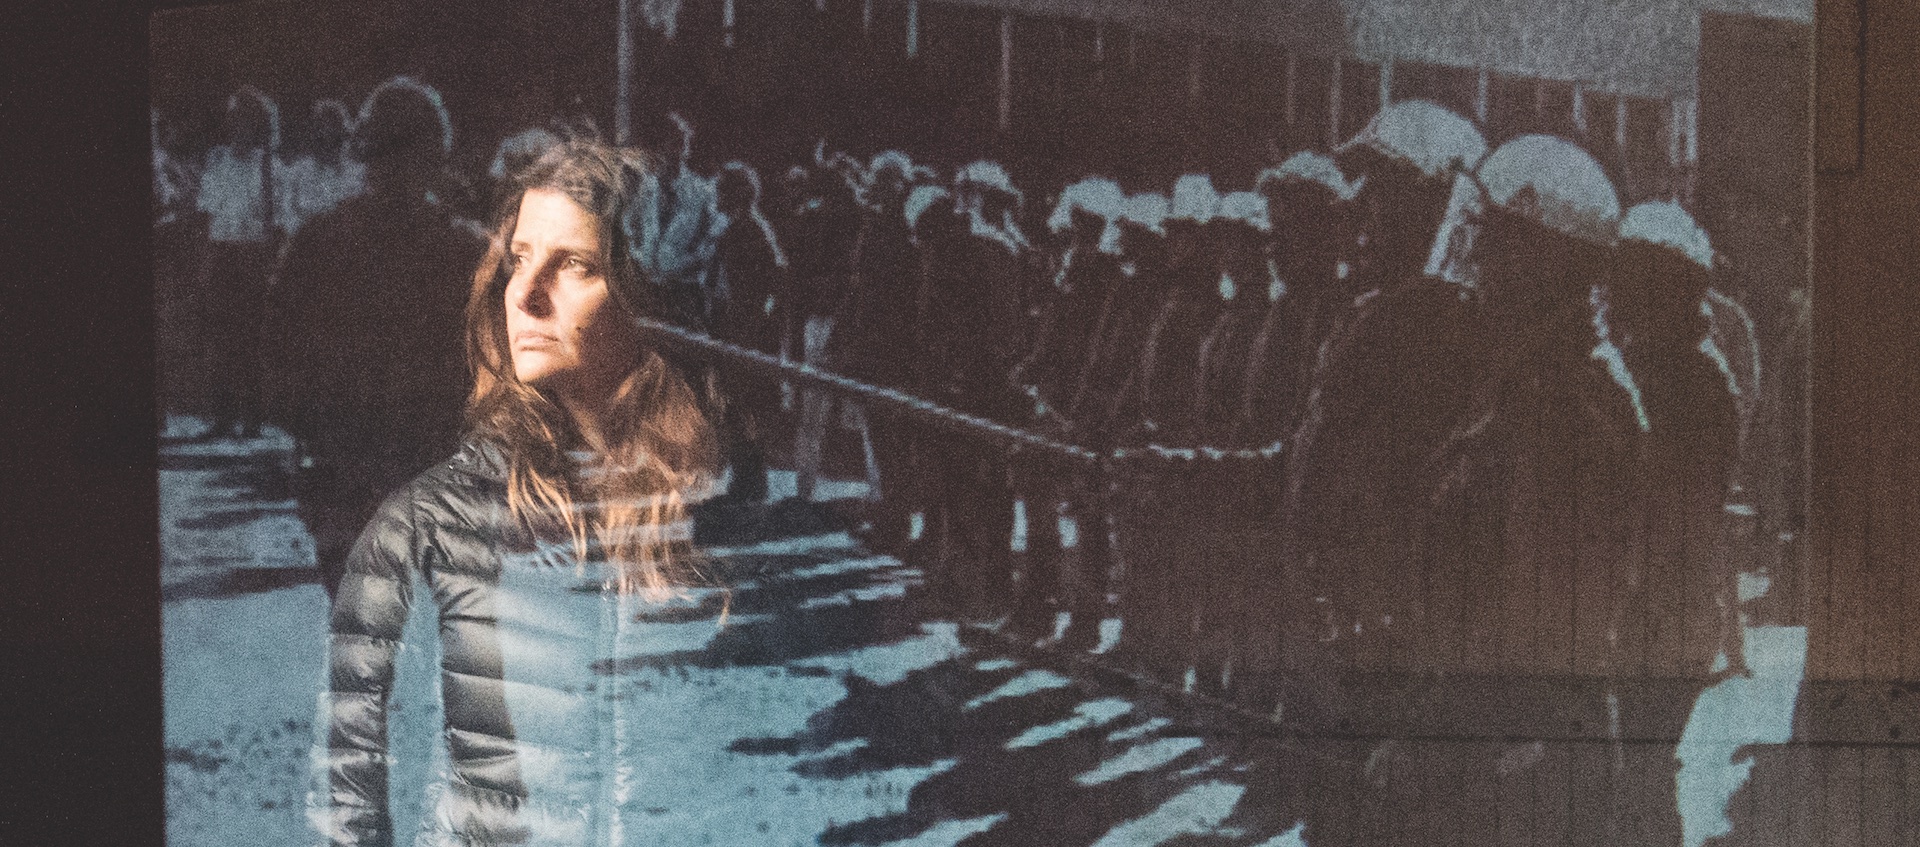 Actress Mia Barron stands behind a transparent screen with an image of police in riot gear during performance of Lars Jan & Early Morning Opera's production of Joan Didion's The White Album